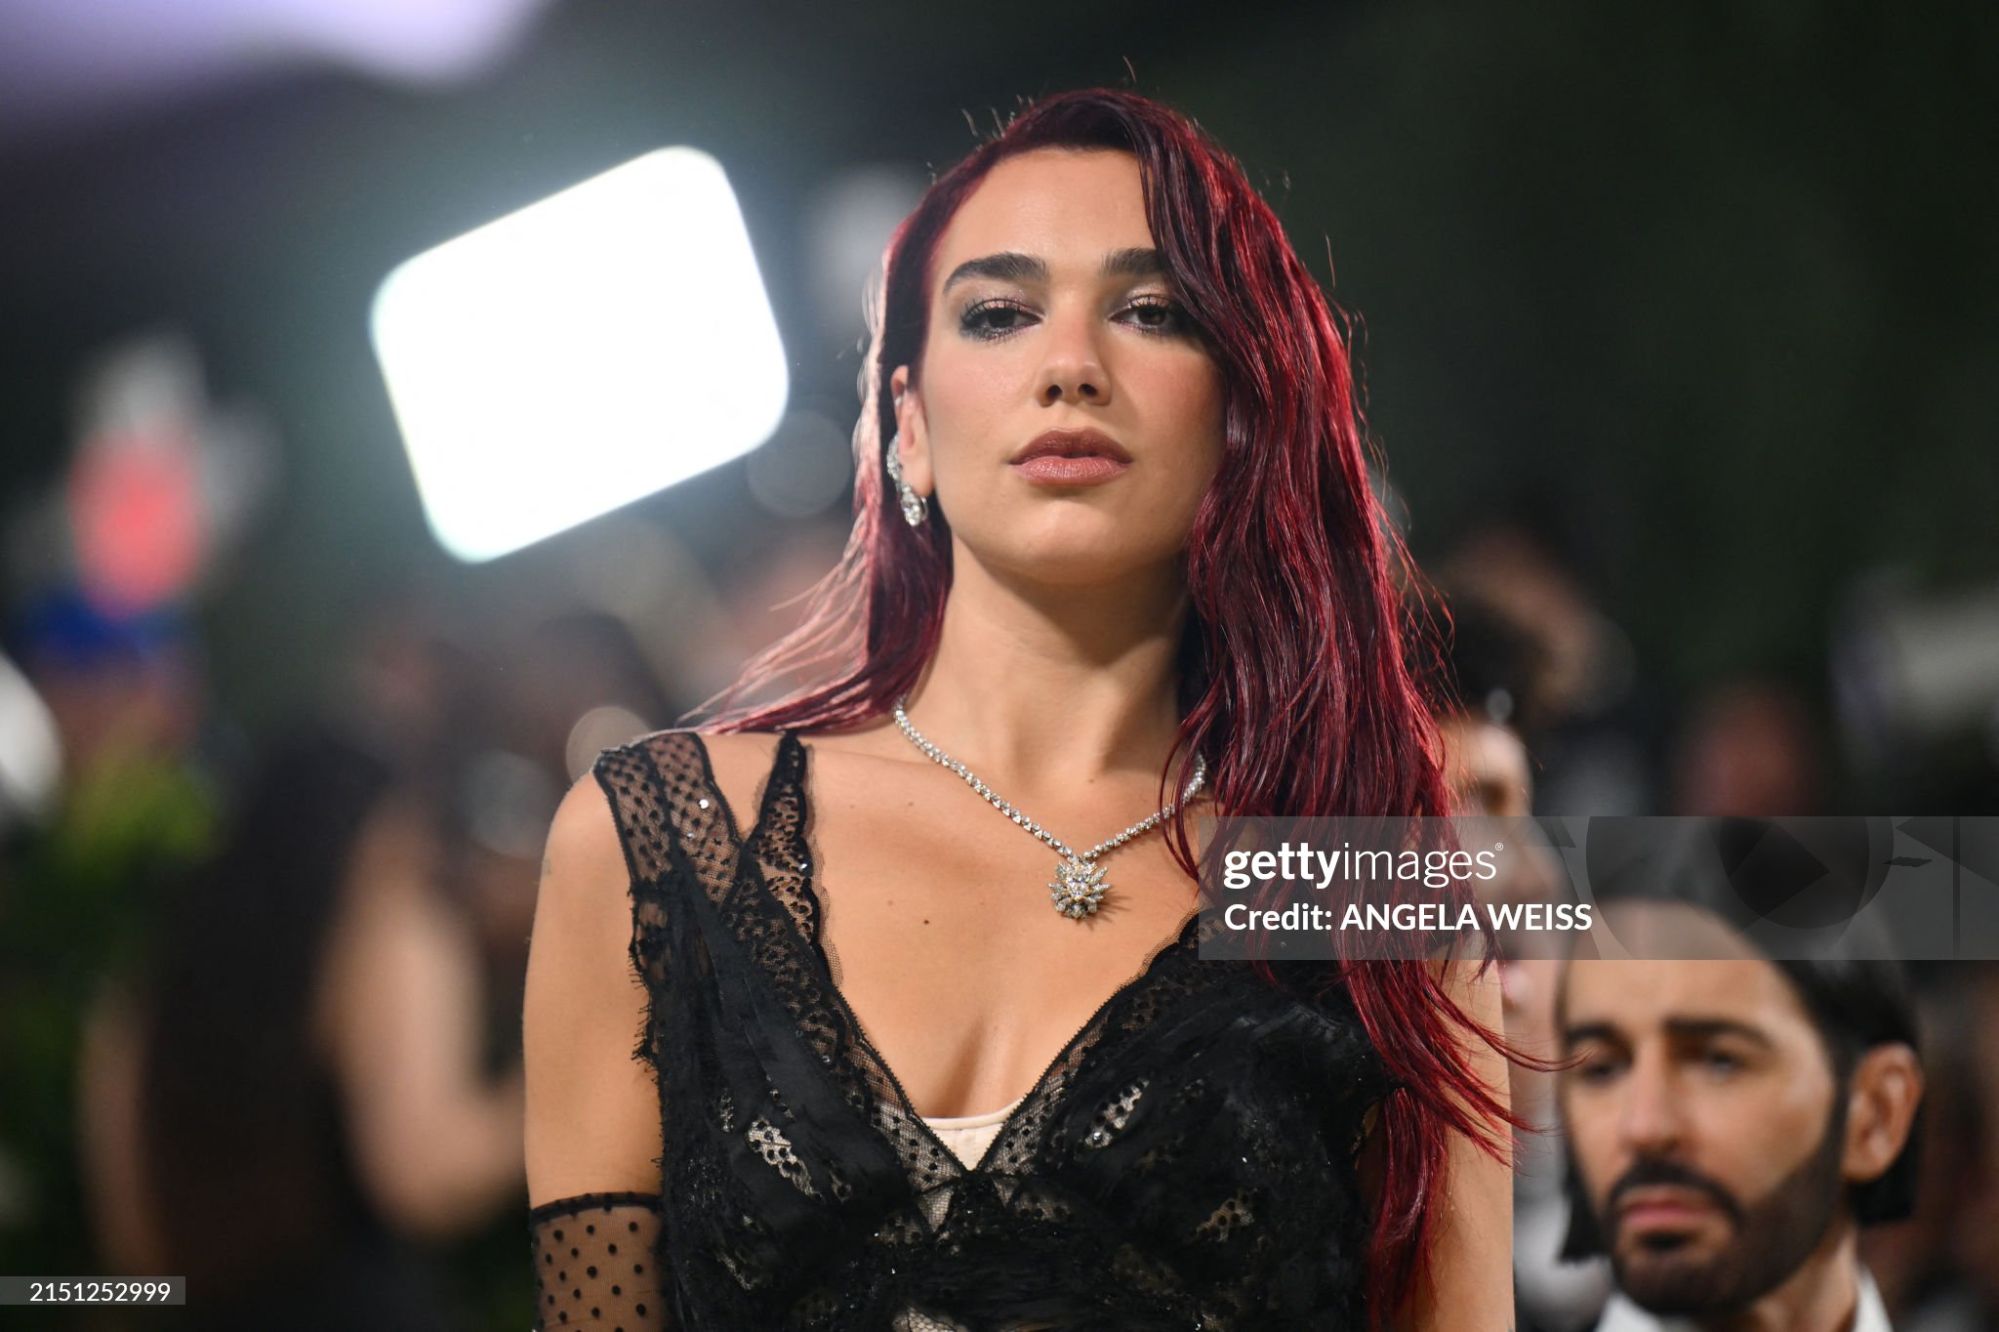 gettyimages-2151252999-2048x2048.jpg